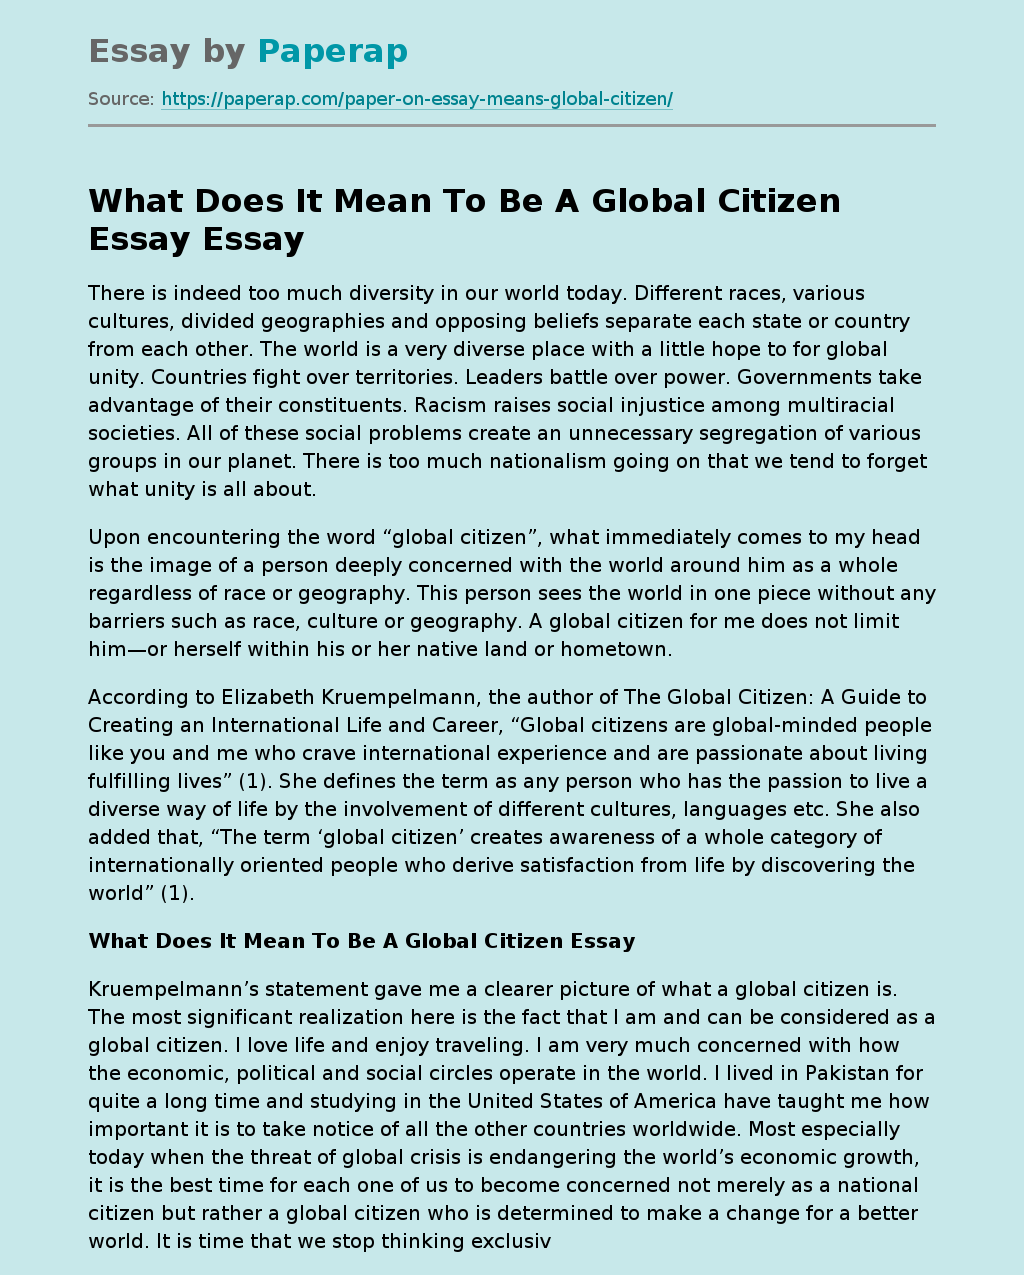 What Does It Mean To Be A Global Citizen Essay